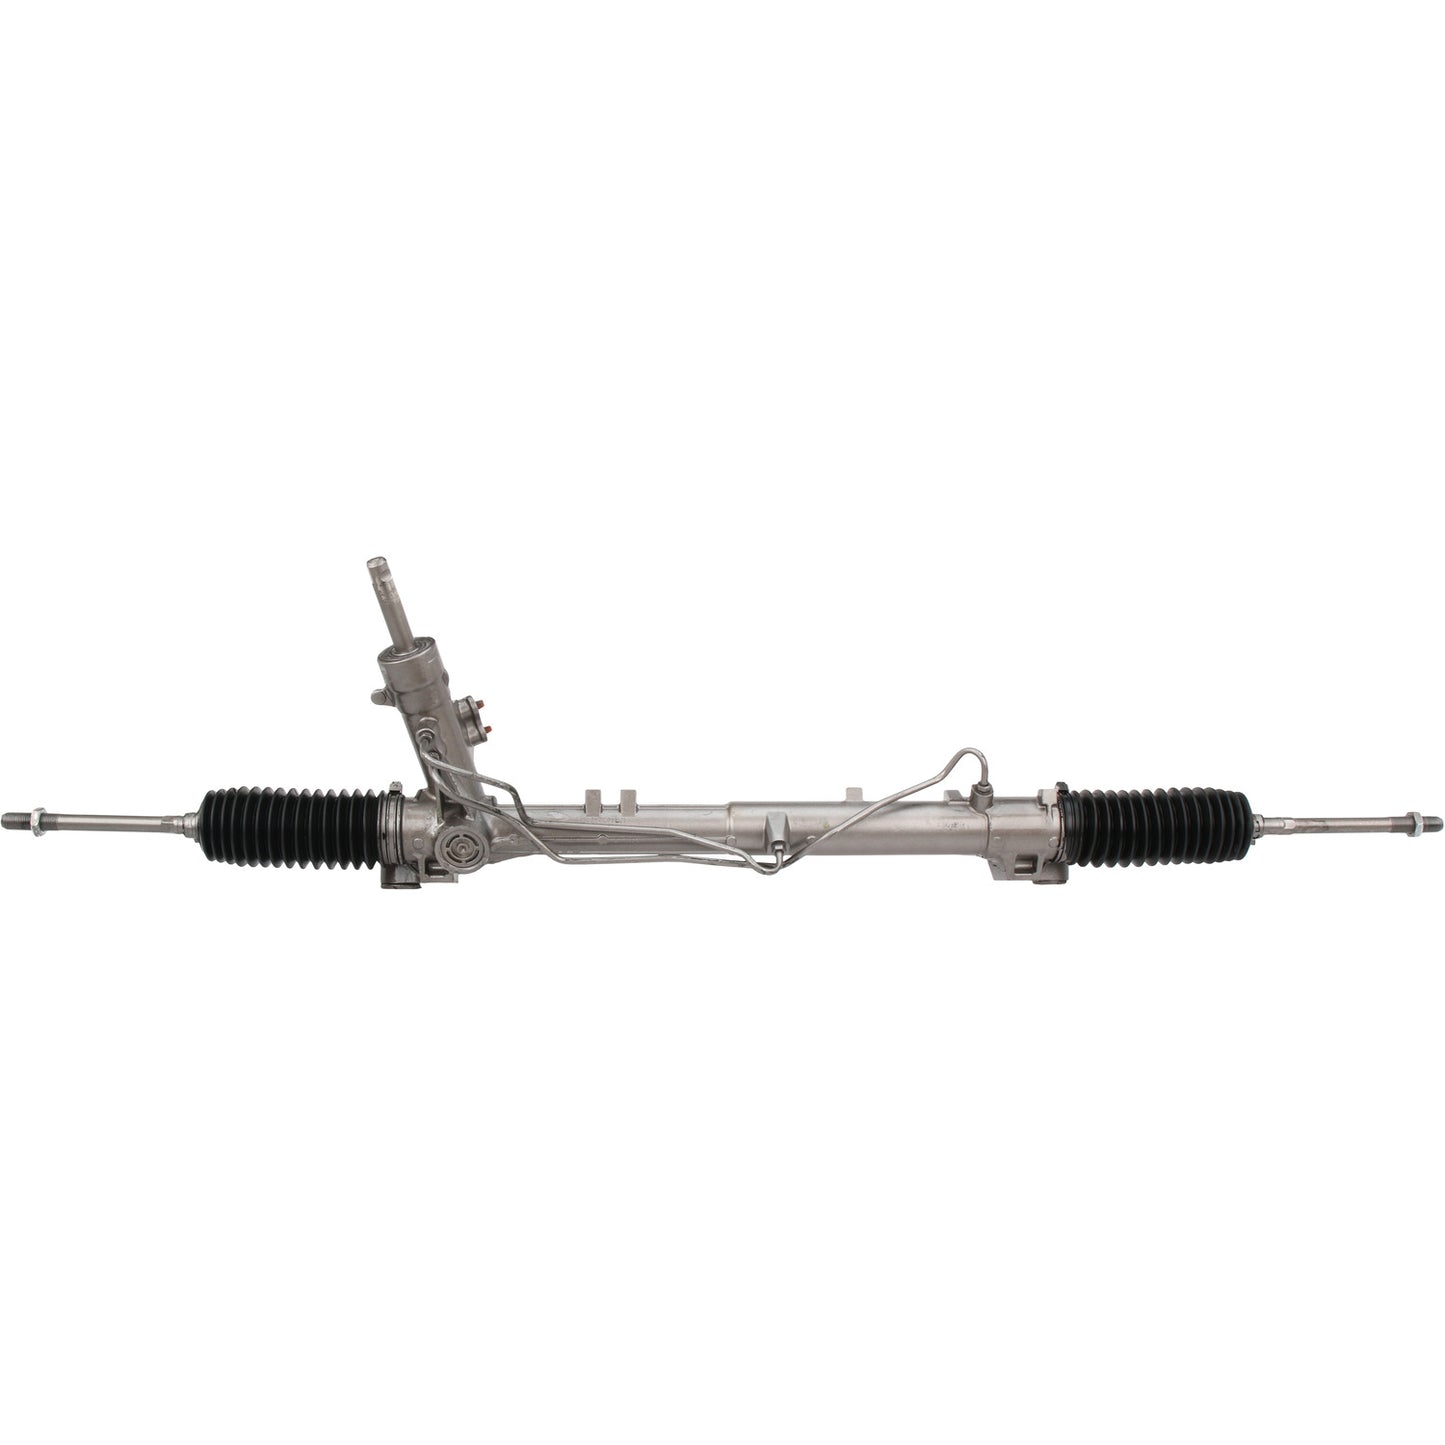 Rack and Pinion Assembly - MAVAL - Hydraulic Power - Remanufactured - 93359M